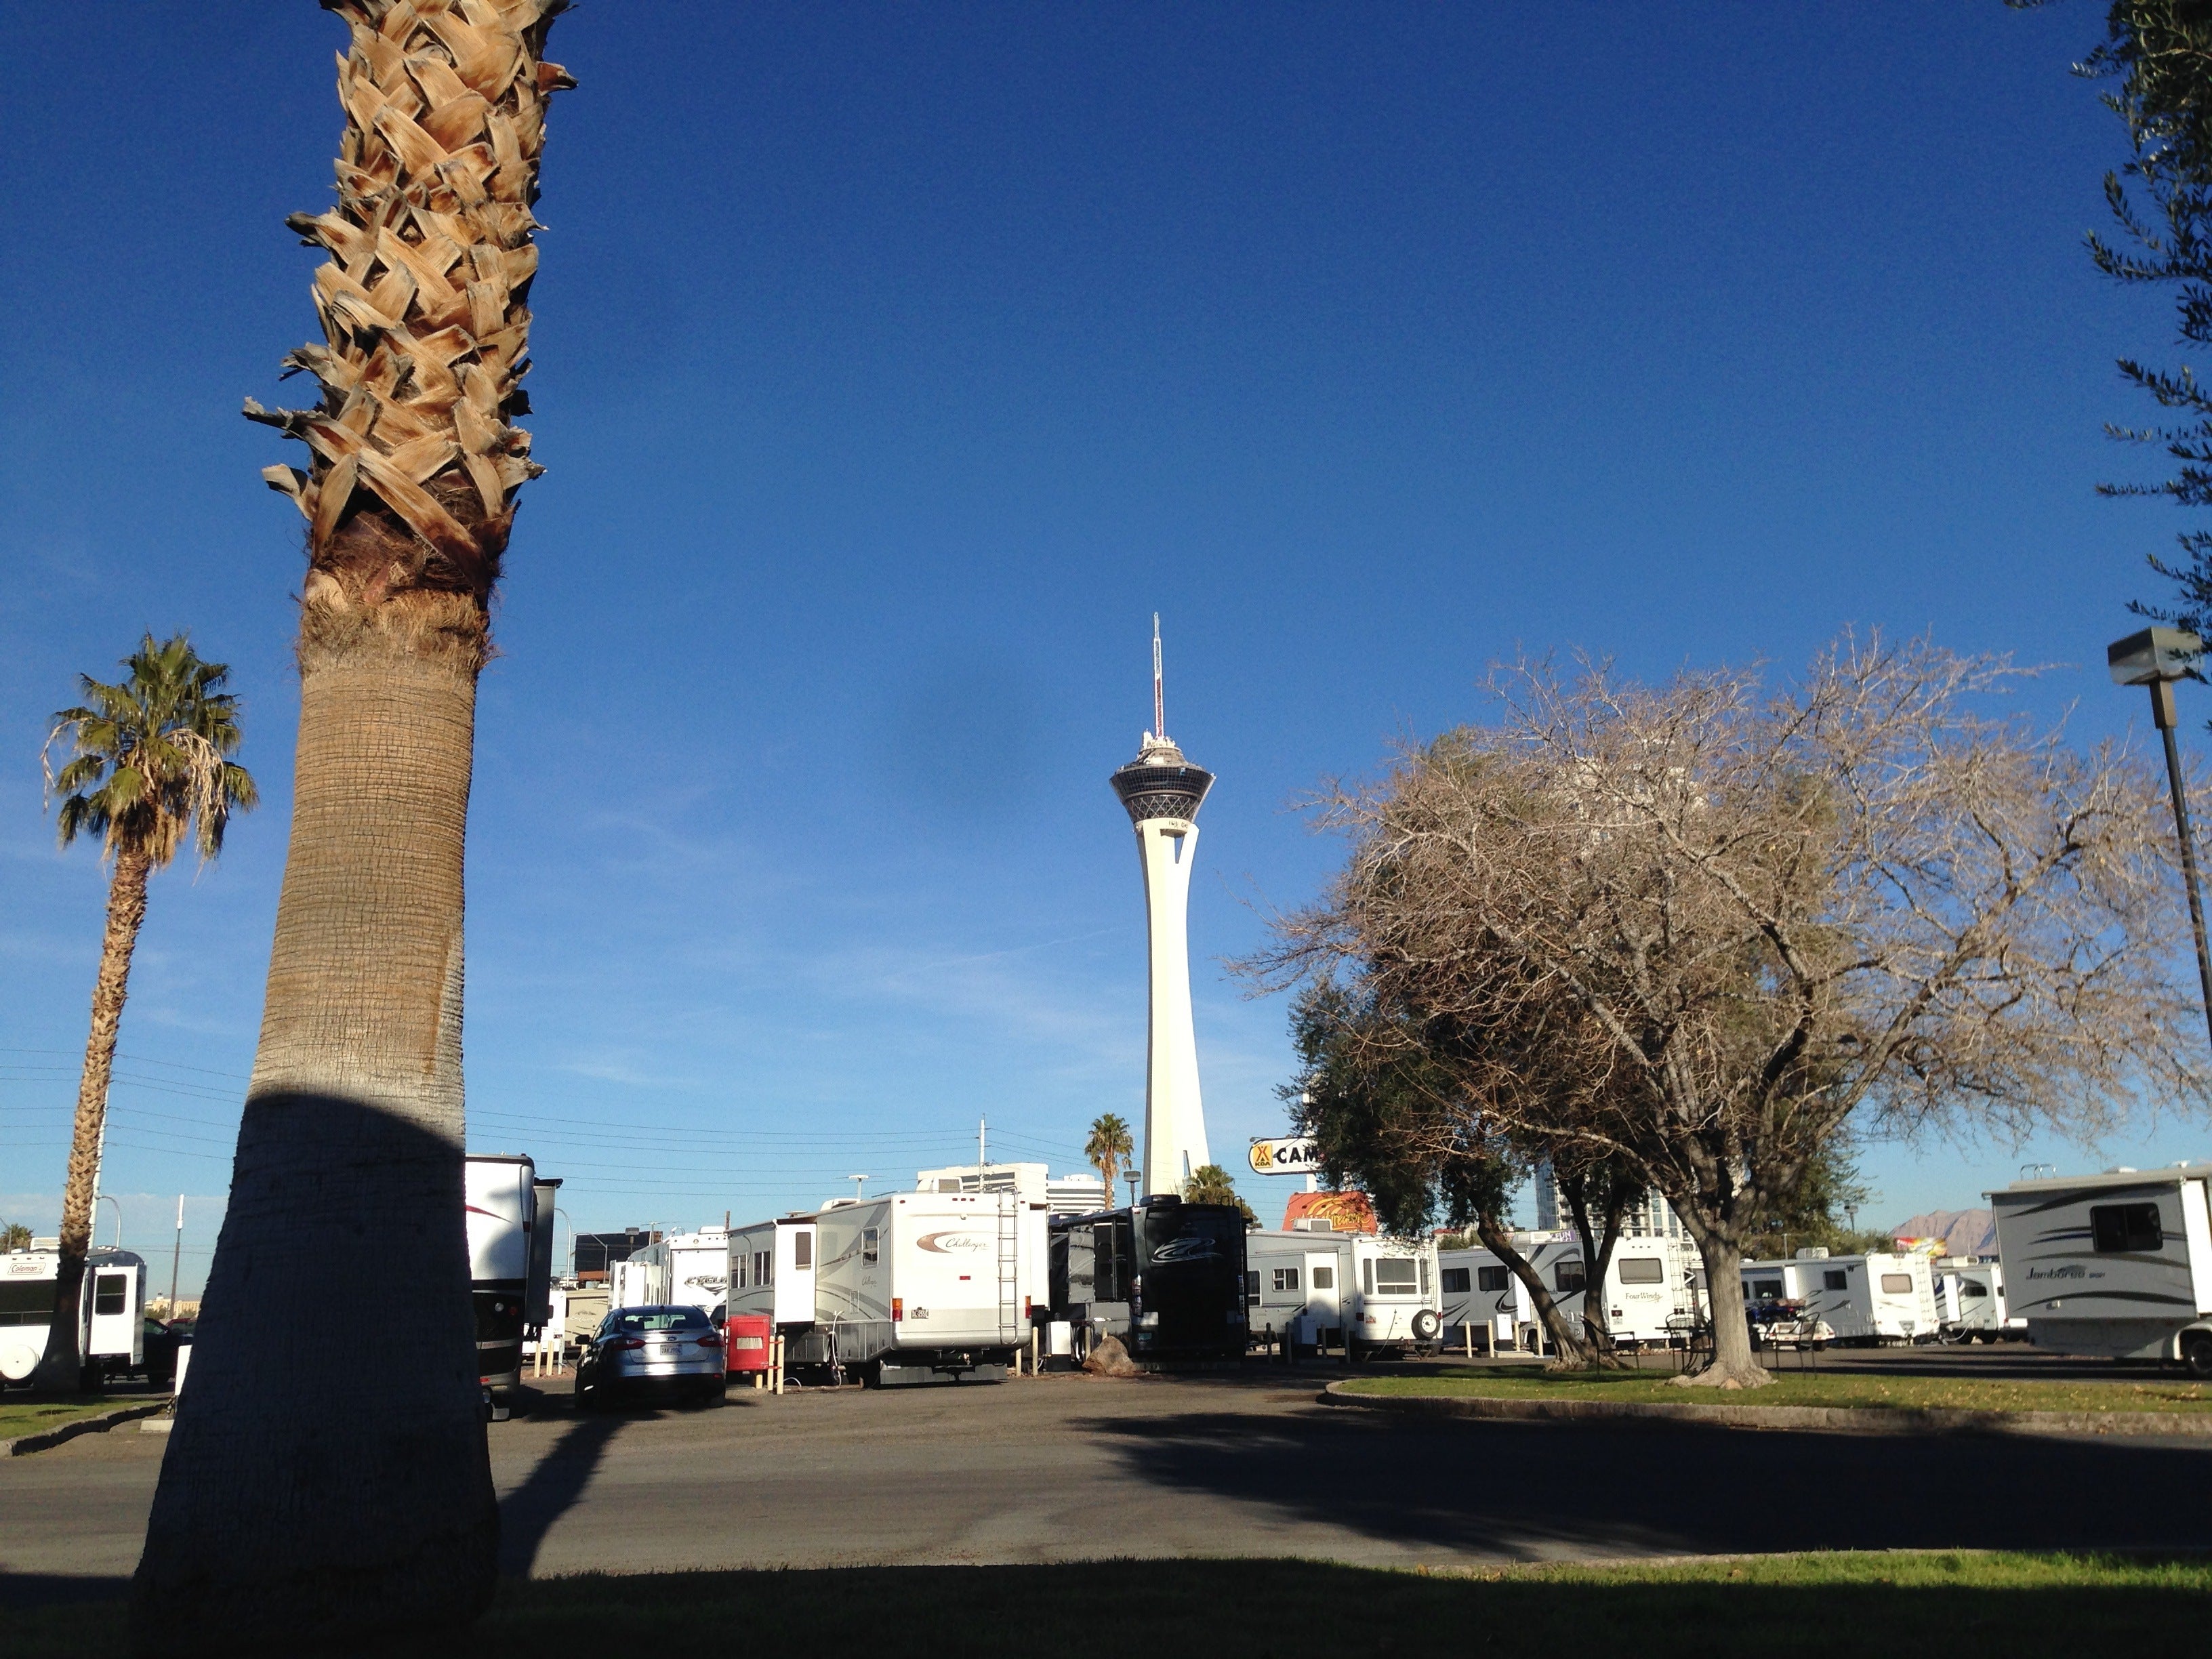 Great view of the Stratosphere